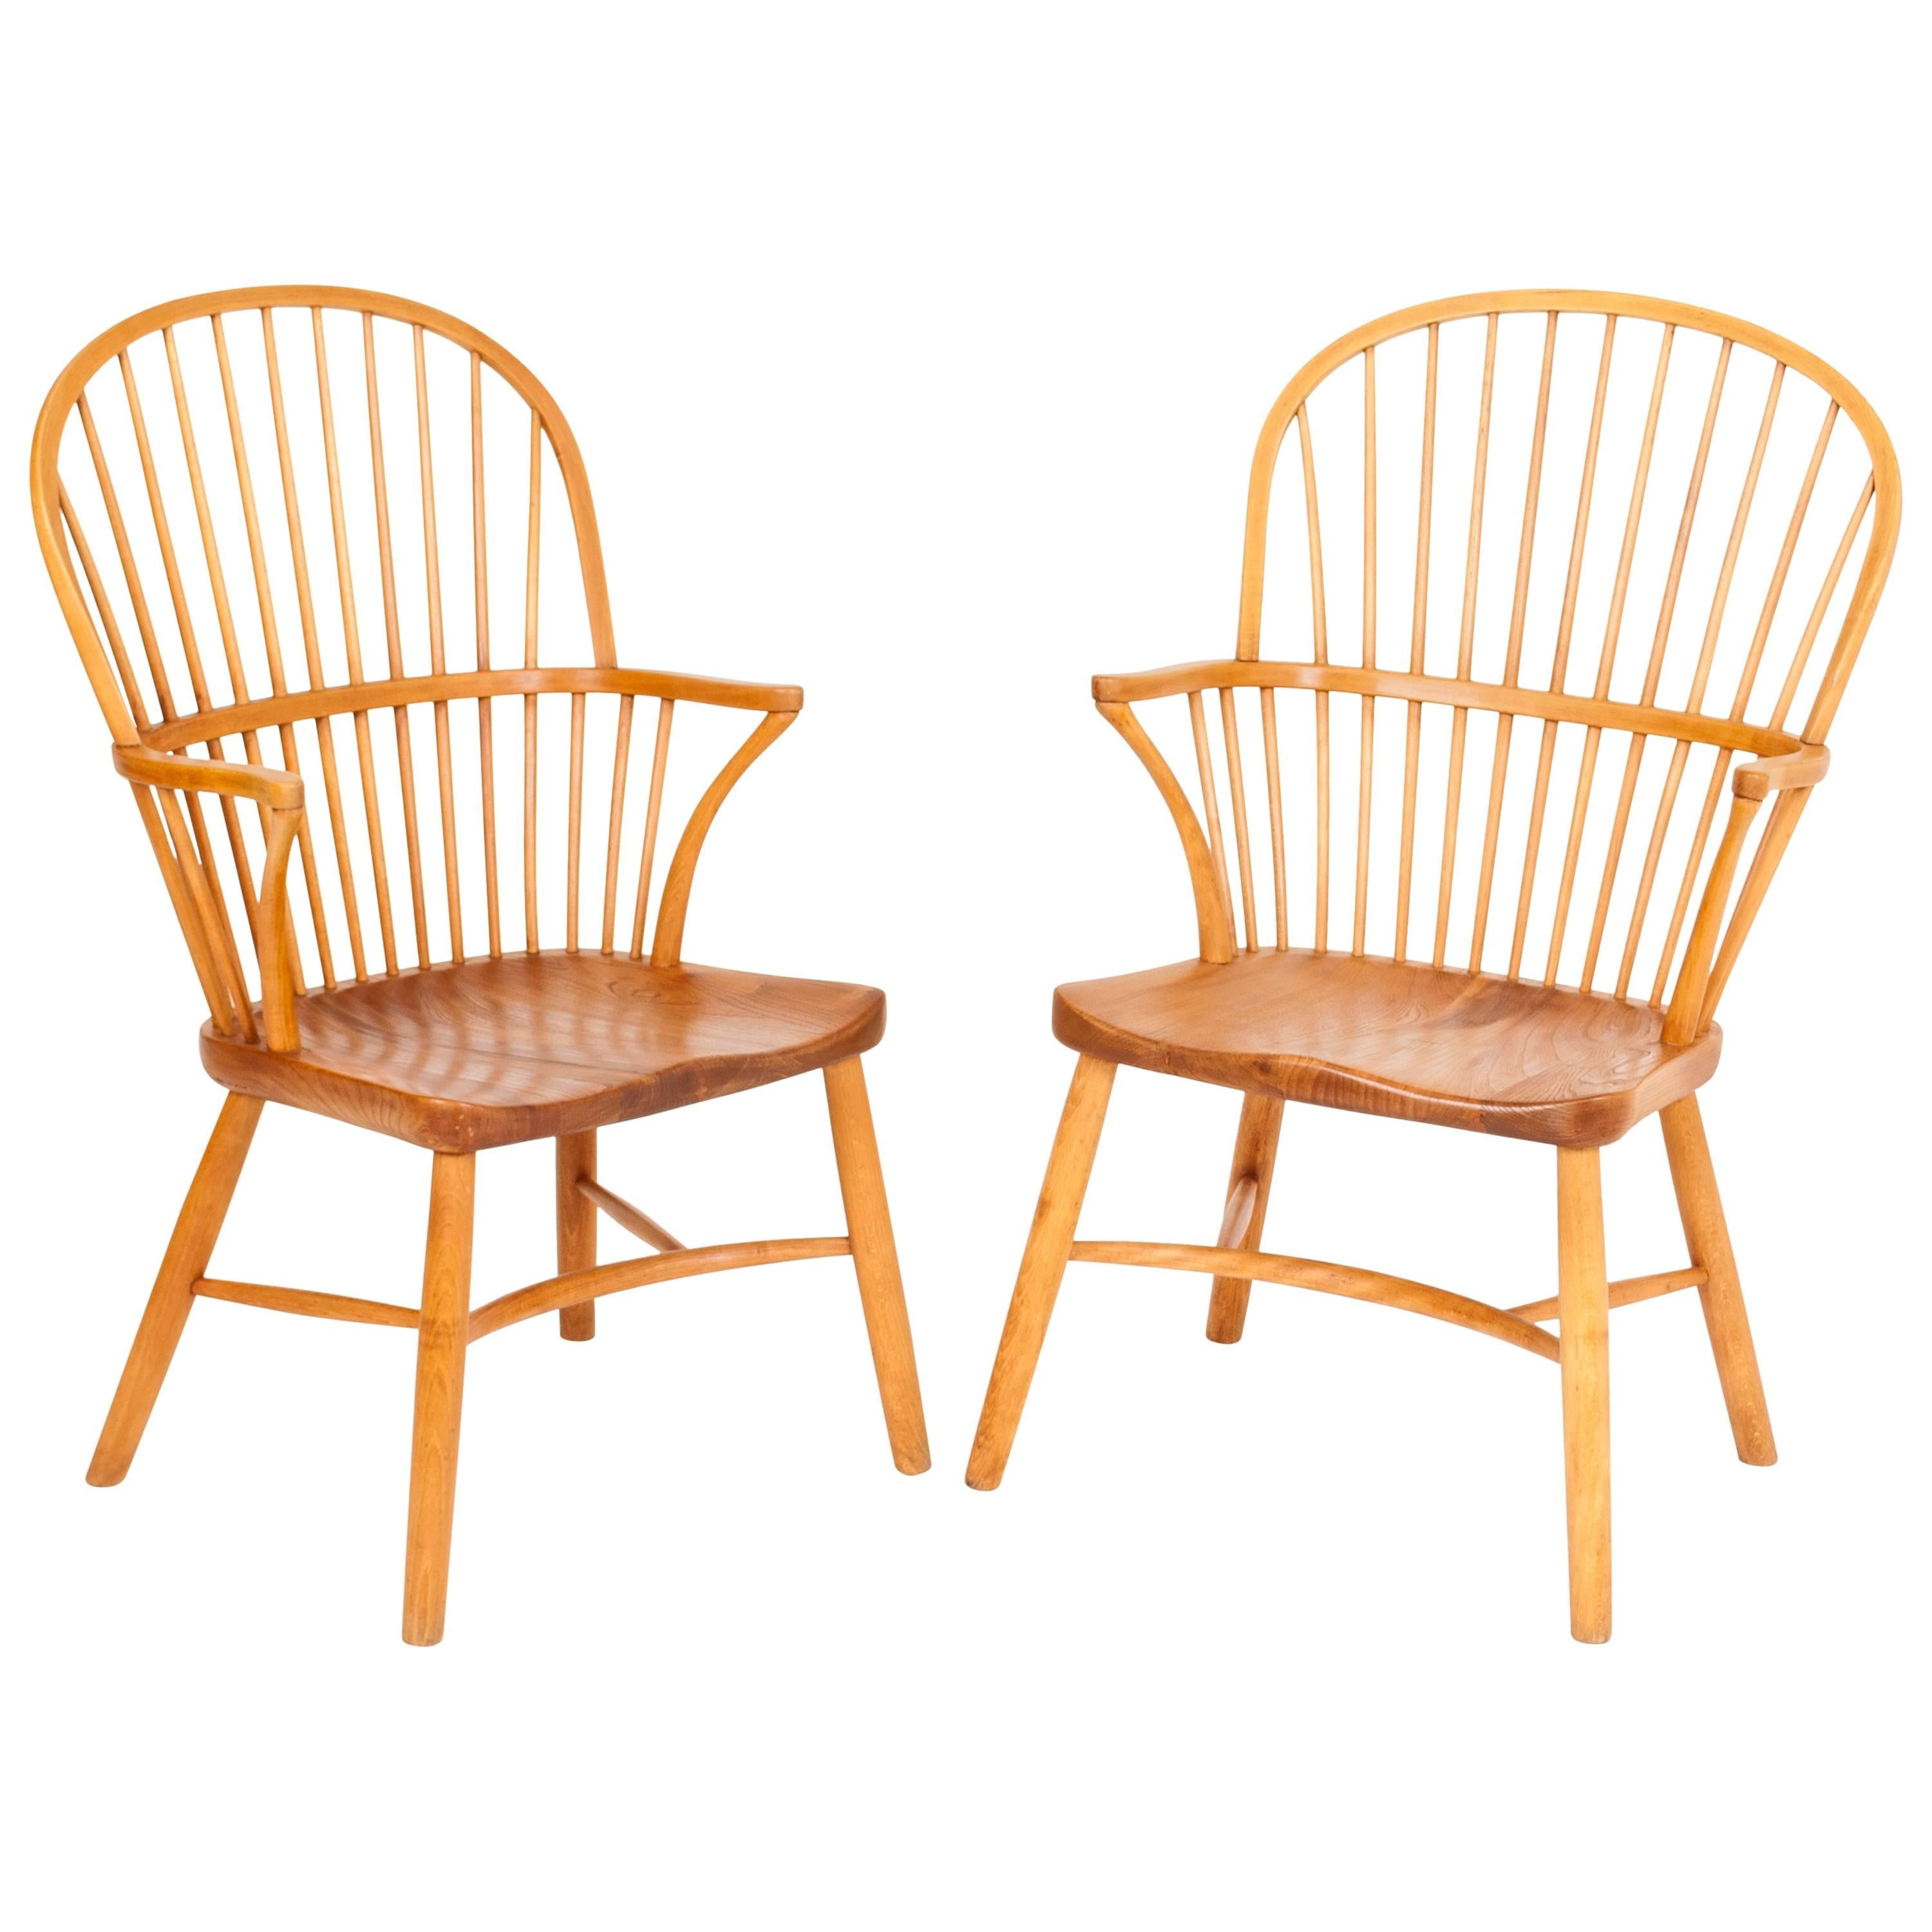 Palle Suenson Windsor Chairs For Sale